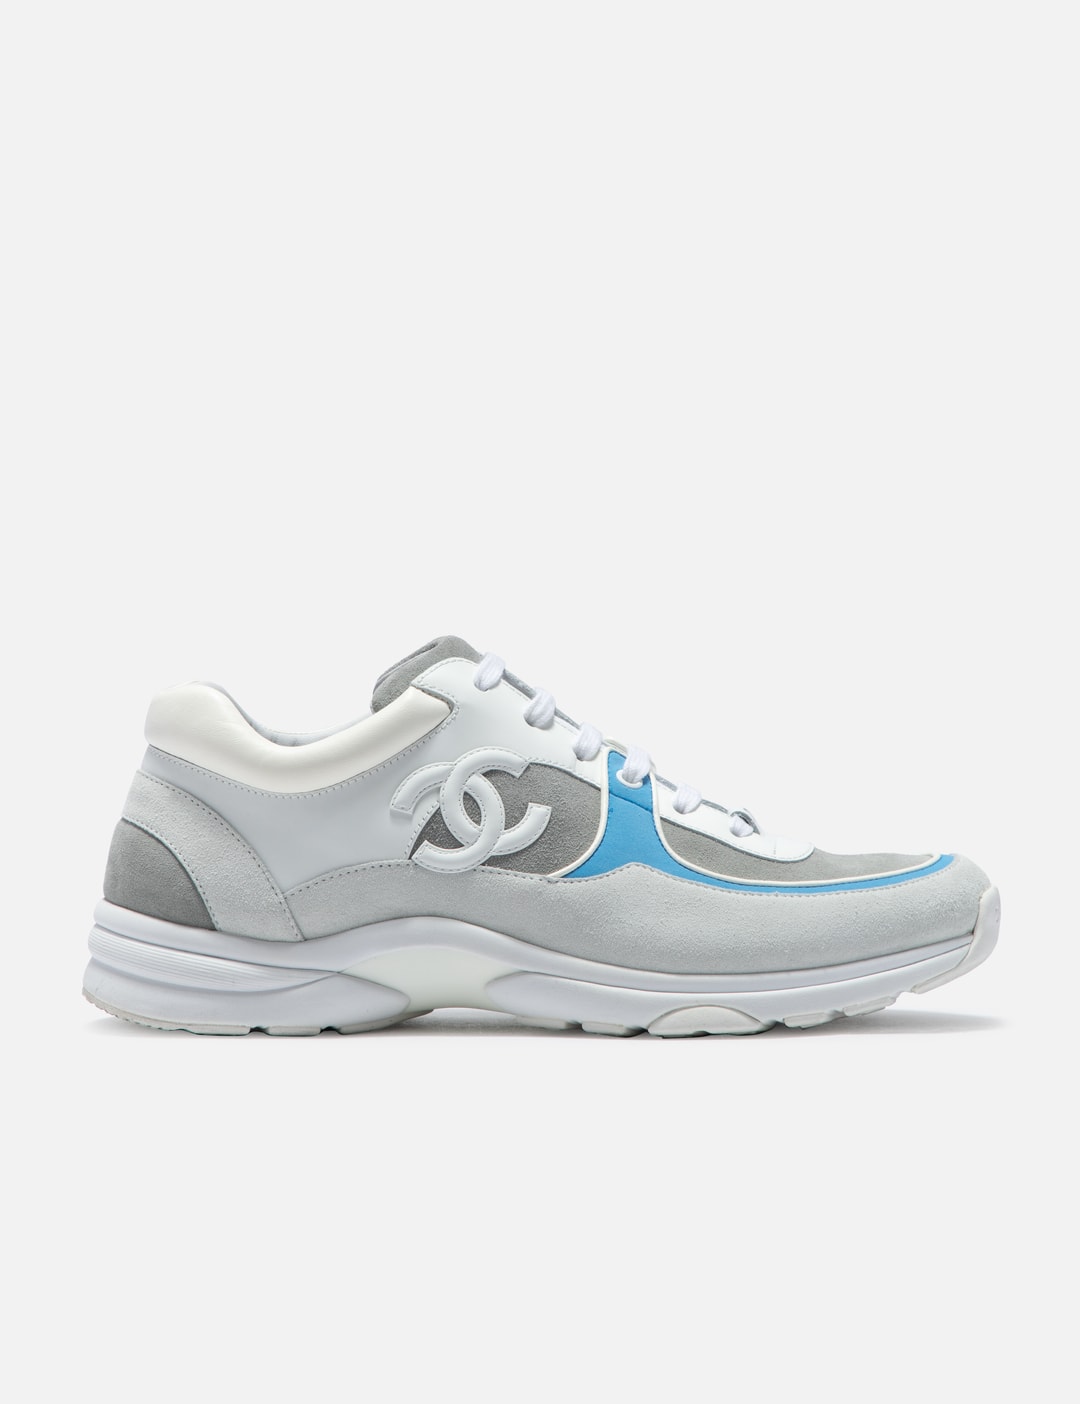 chanel - Chanel White Blue Sneakers | HBX - Globally Curated Fashion and by Hypebeast